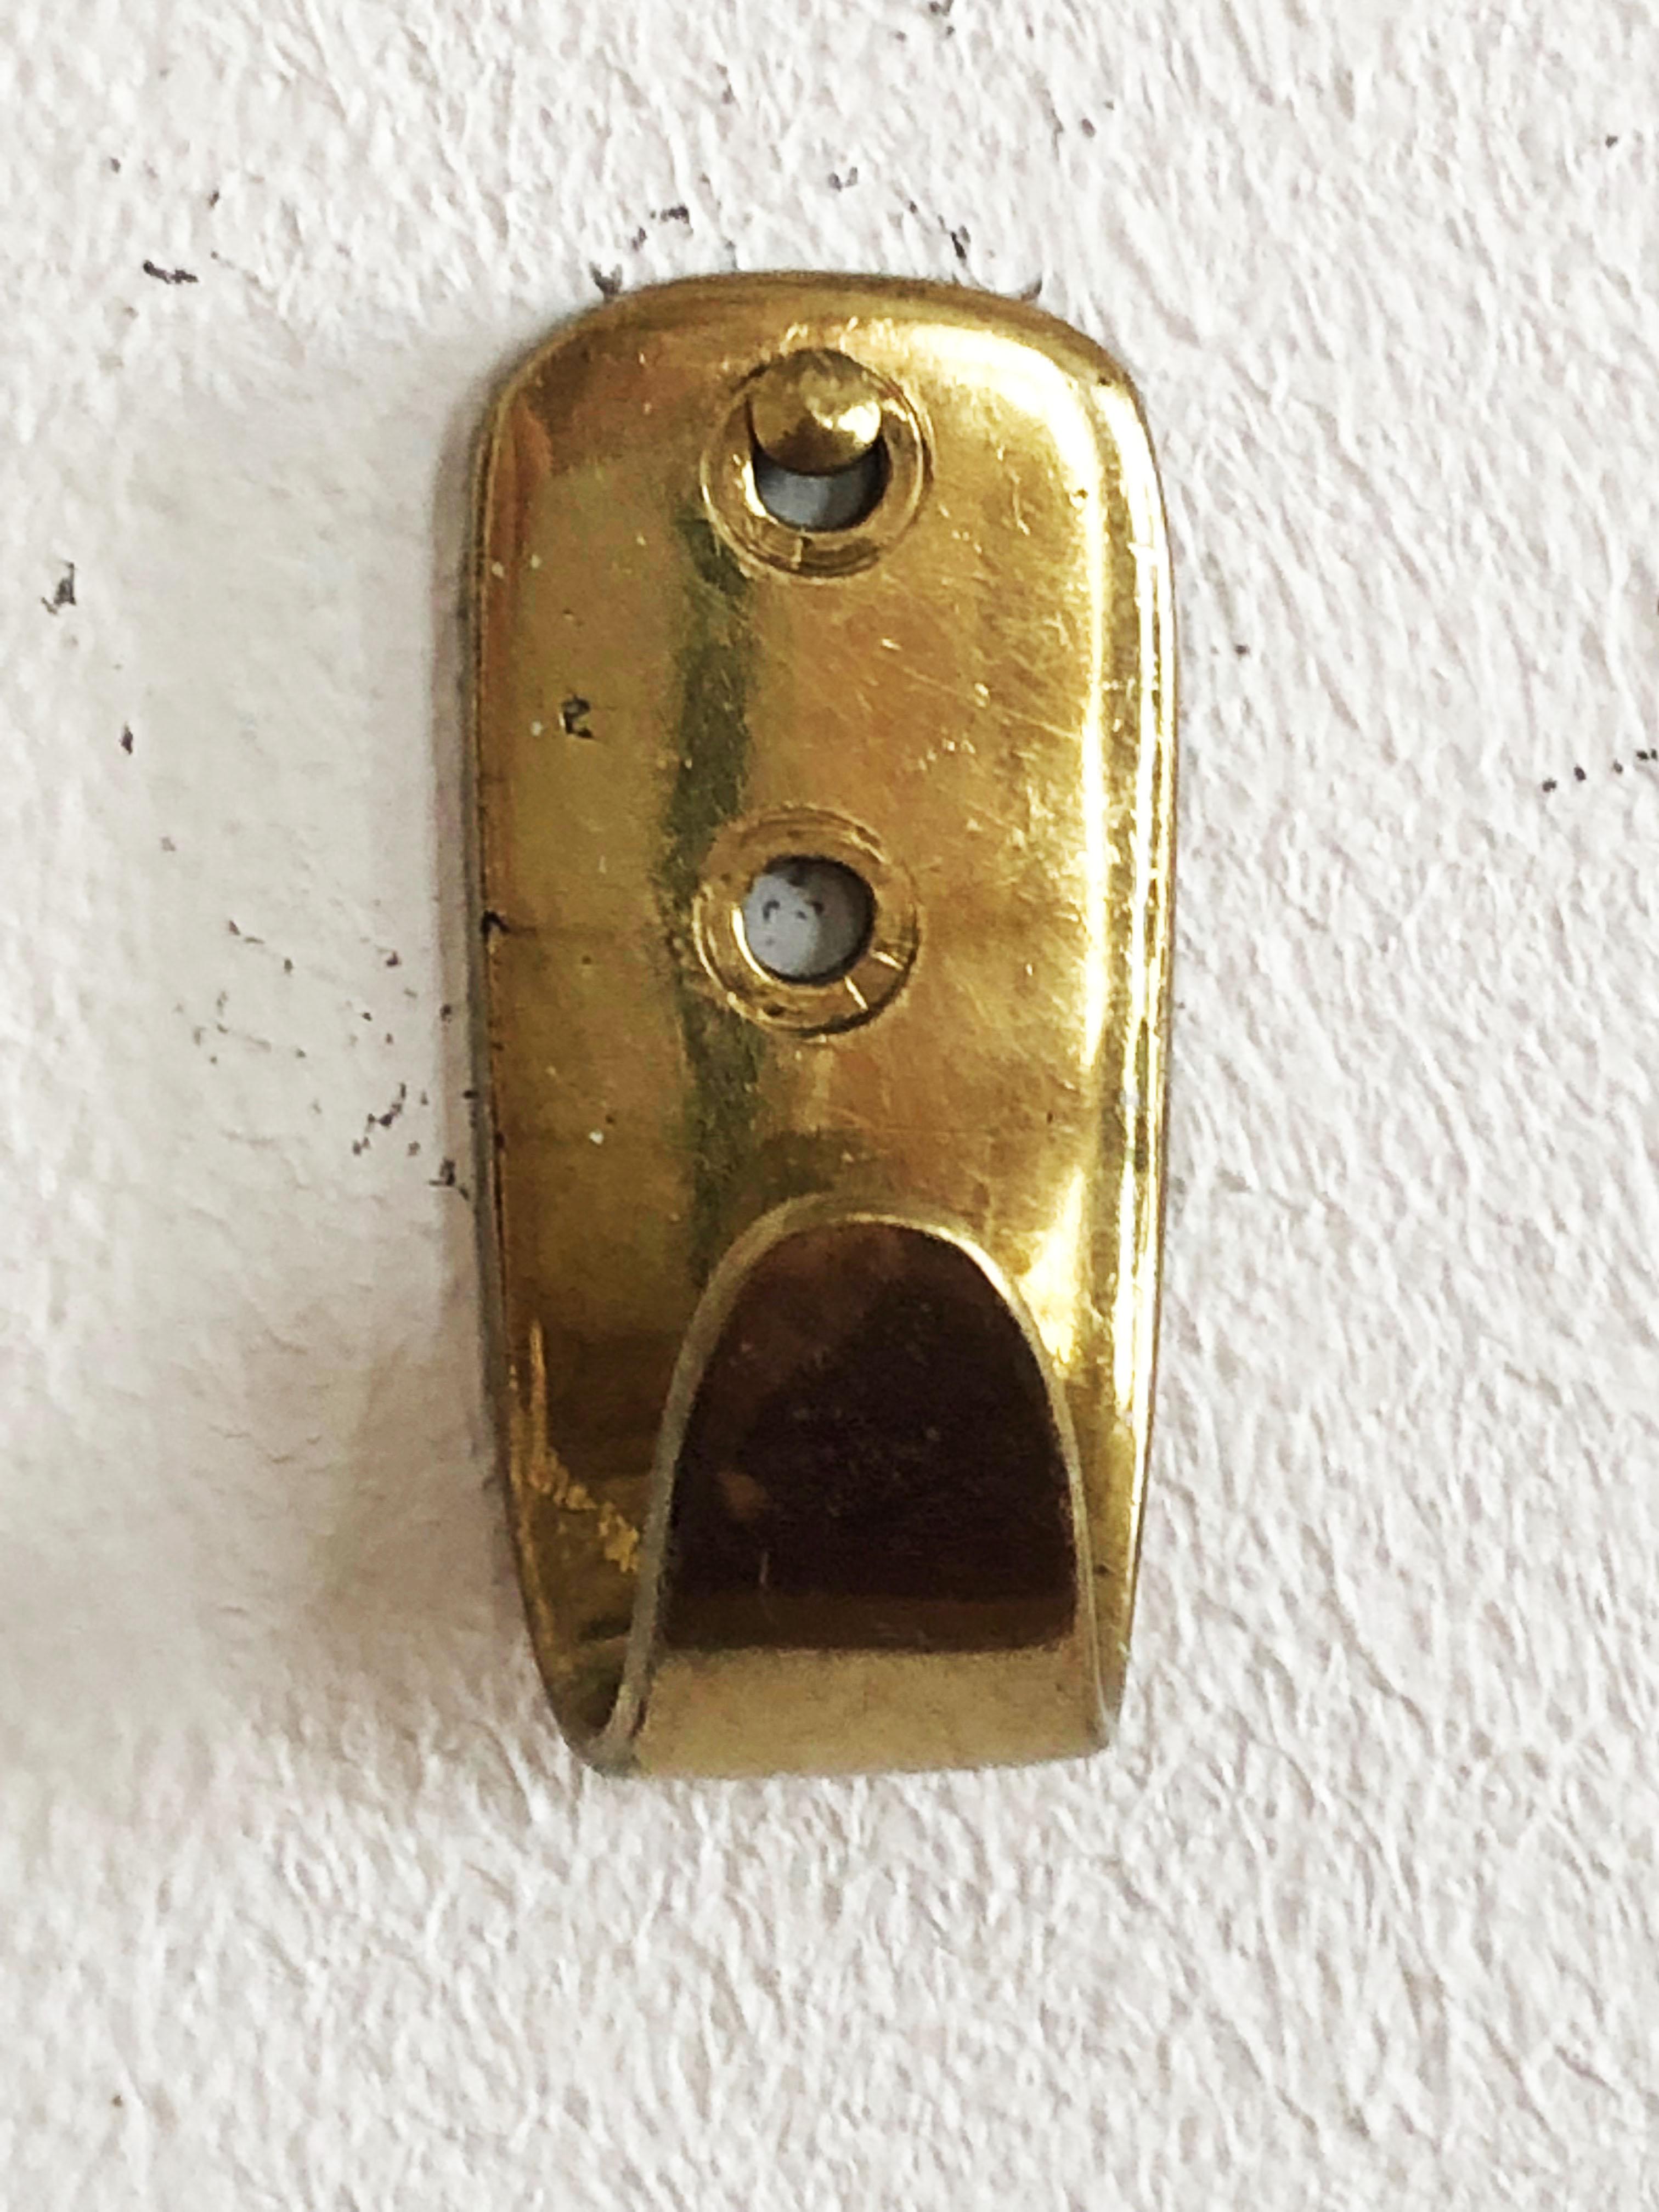 Brass hooks manufactured by Carl Auböck model #4330/ 1 in Austria in the 1950s.
2 available.